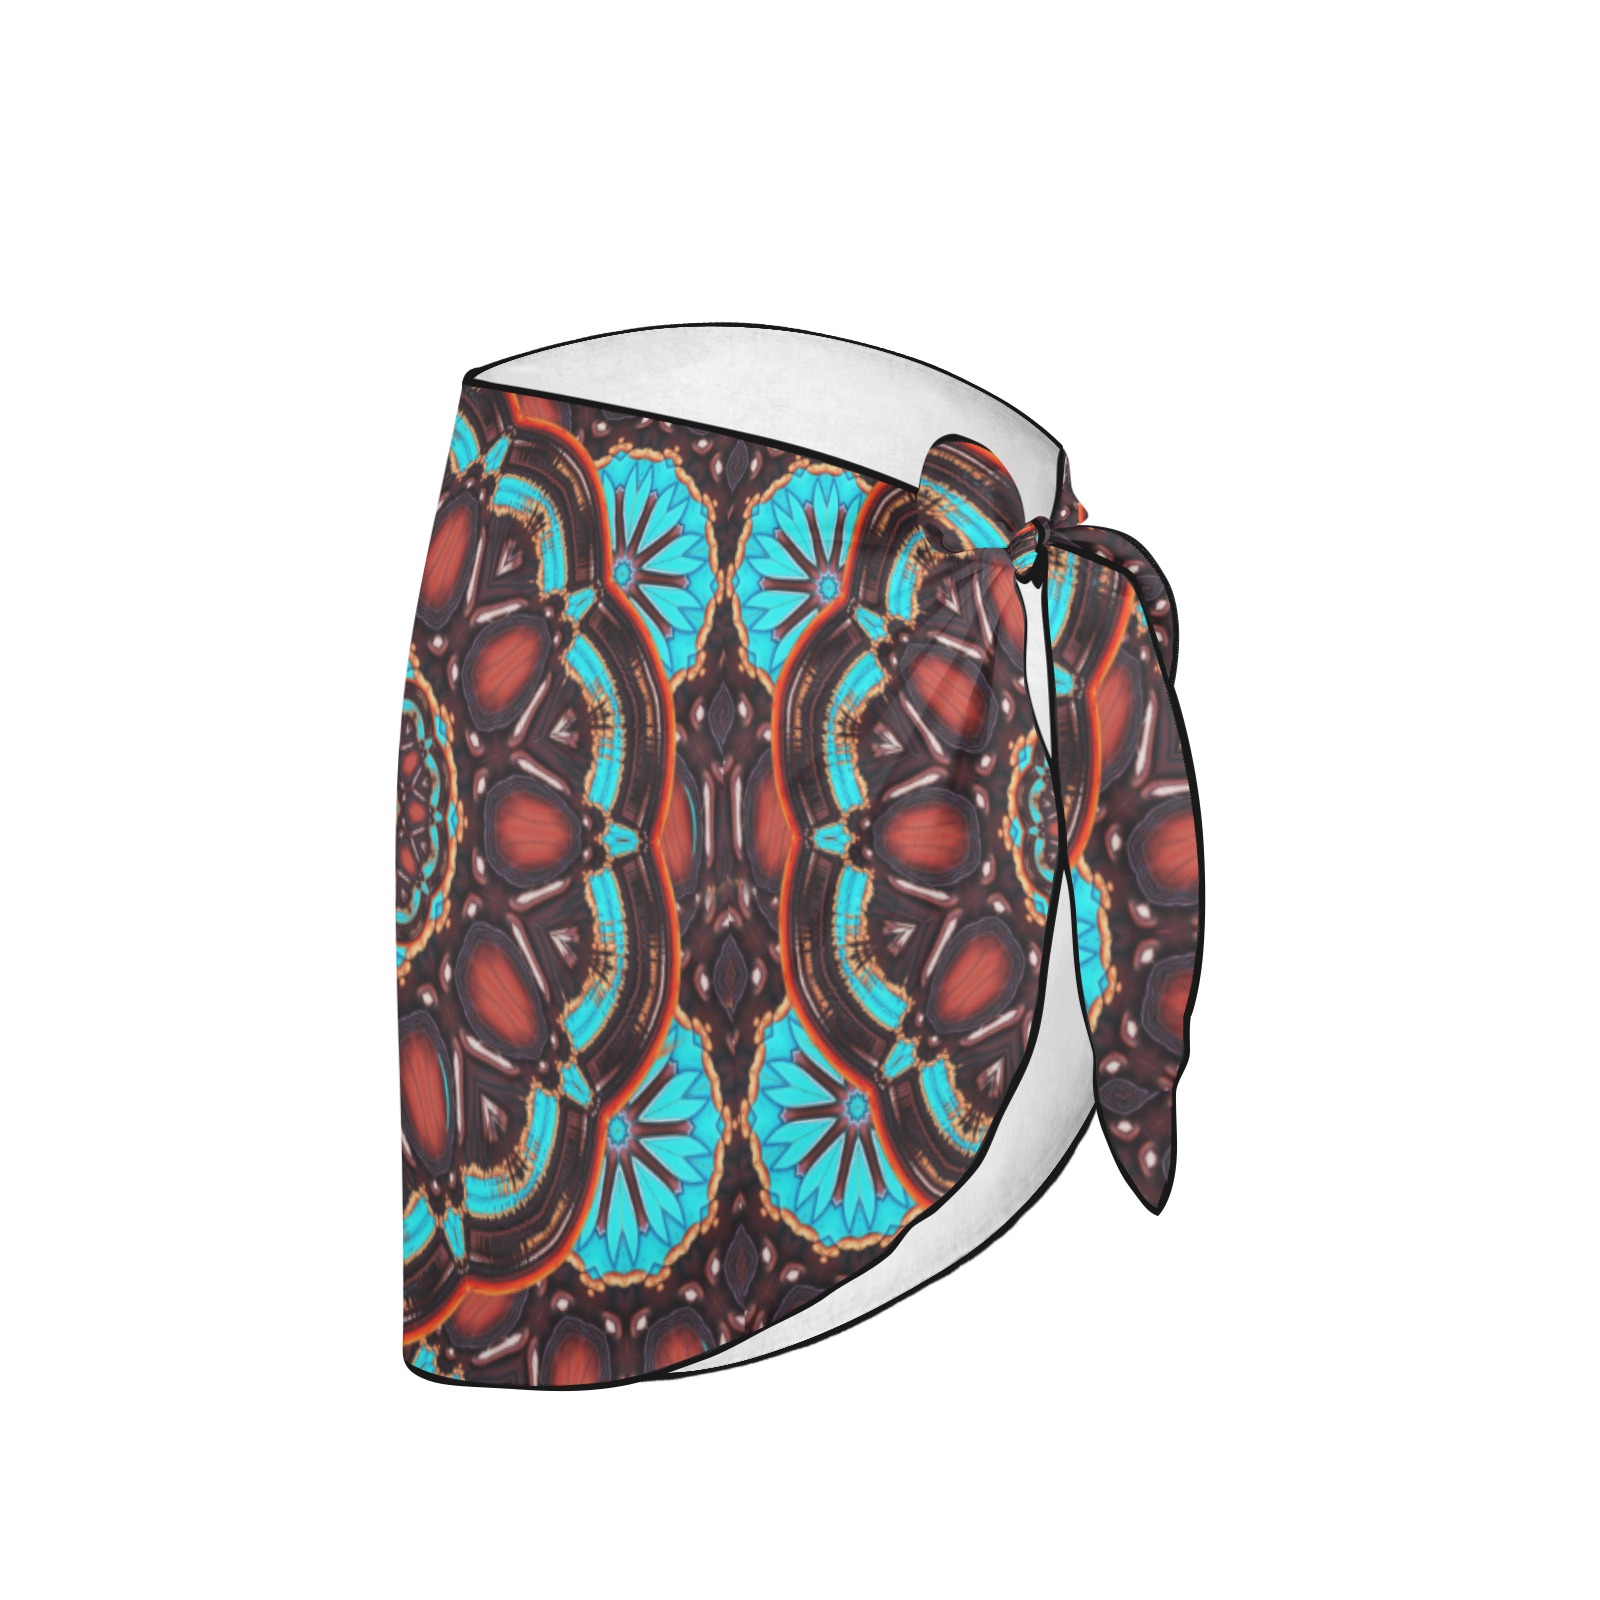 Wood and Turquoise Abstract Beach Sarong Wrap